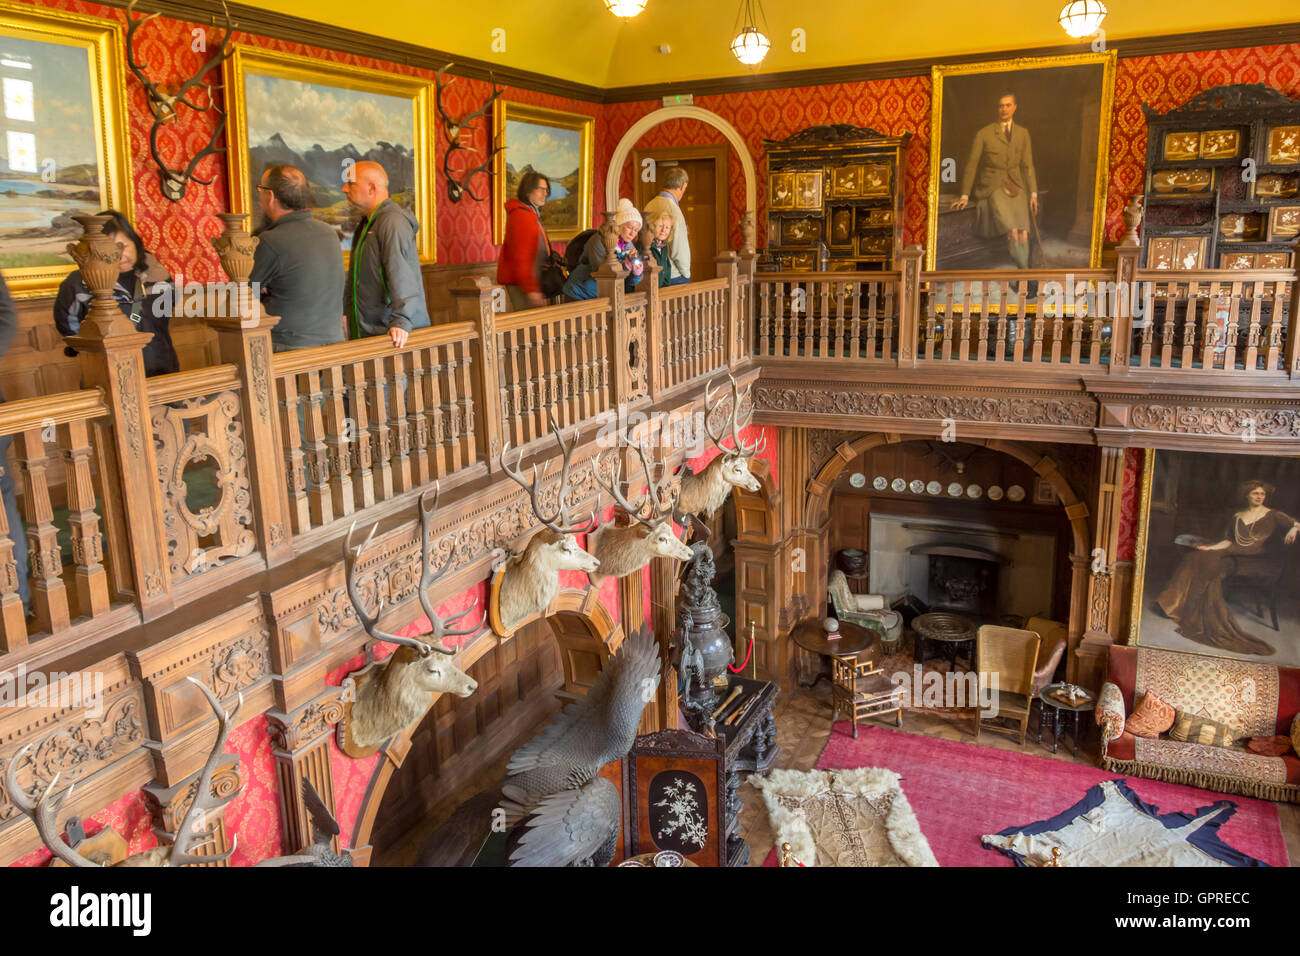 The Gallery of the Grand Hall inside Kinloch Castle, Isle of Rum, Scotland, UK Stock Photo